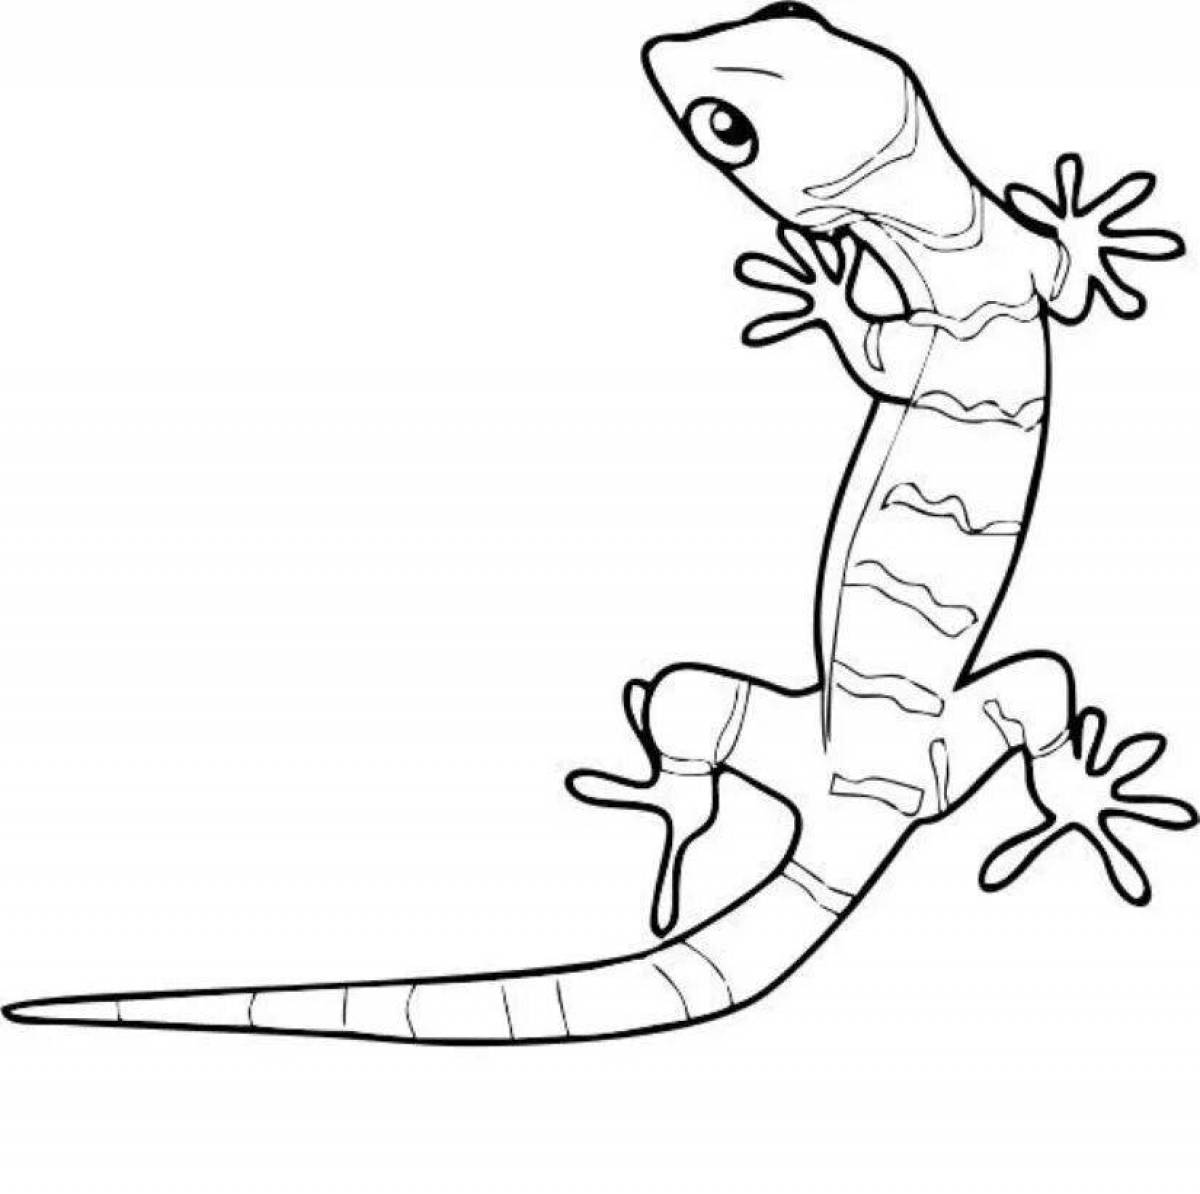 Coloring page striking gecko